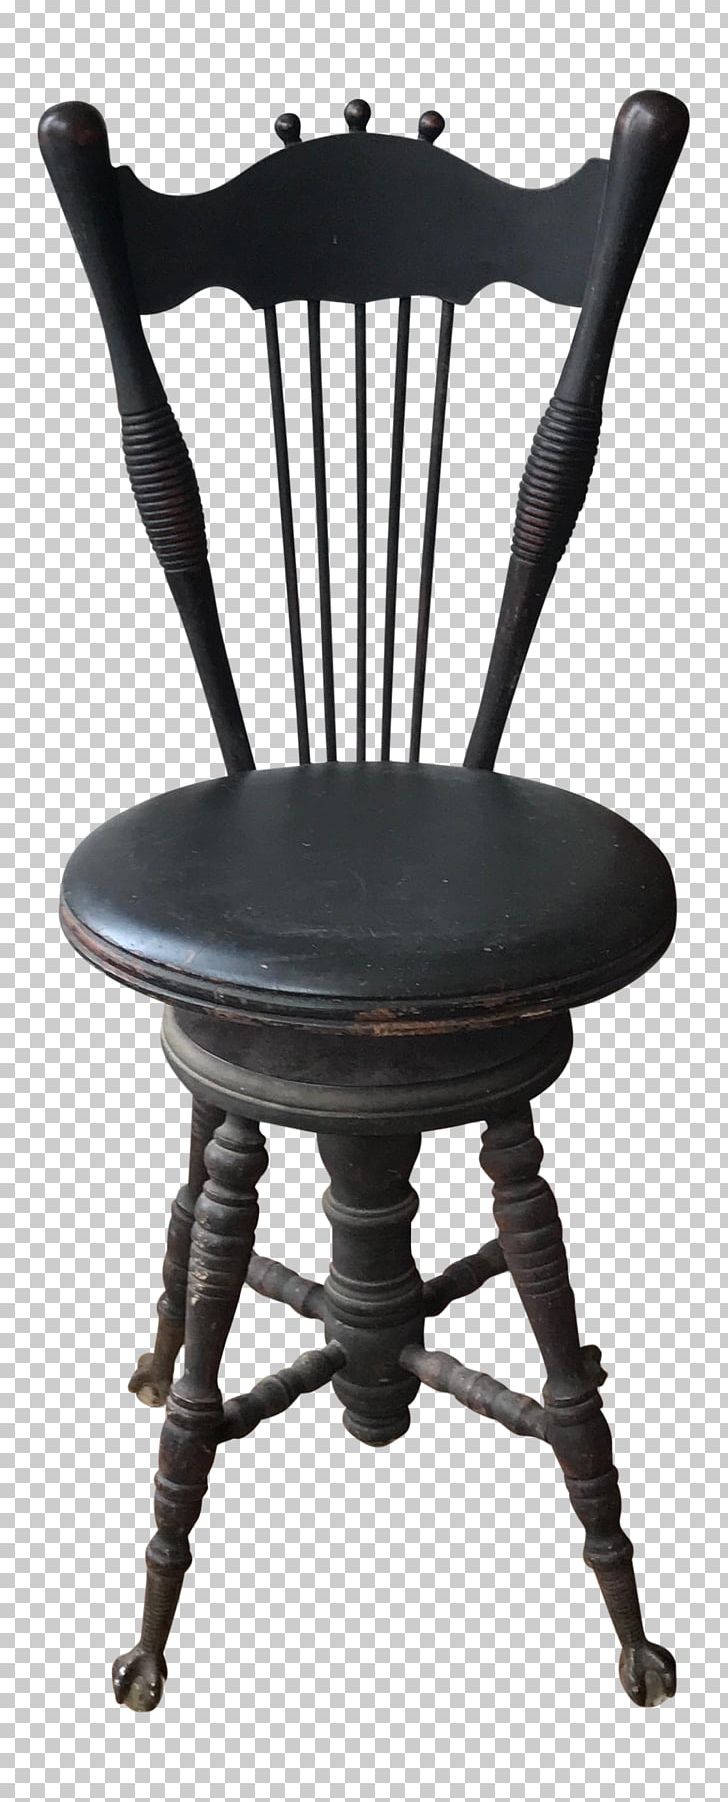 Furniture Chair PNG, Clipart, Chair, Furniture, Iron Maiden, Iron Man, Stool Free PNG Download